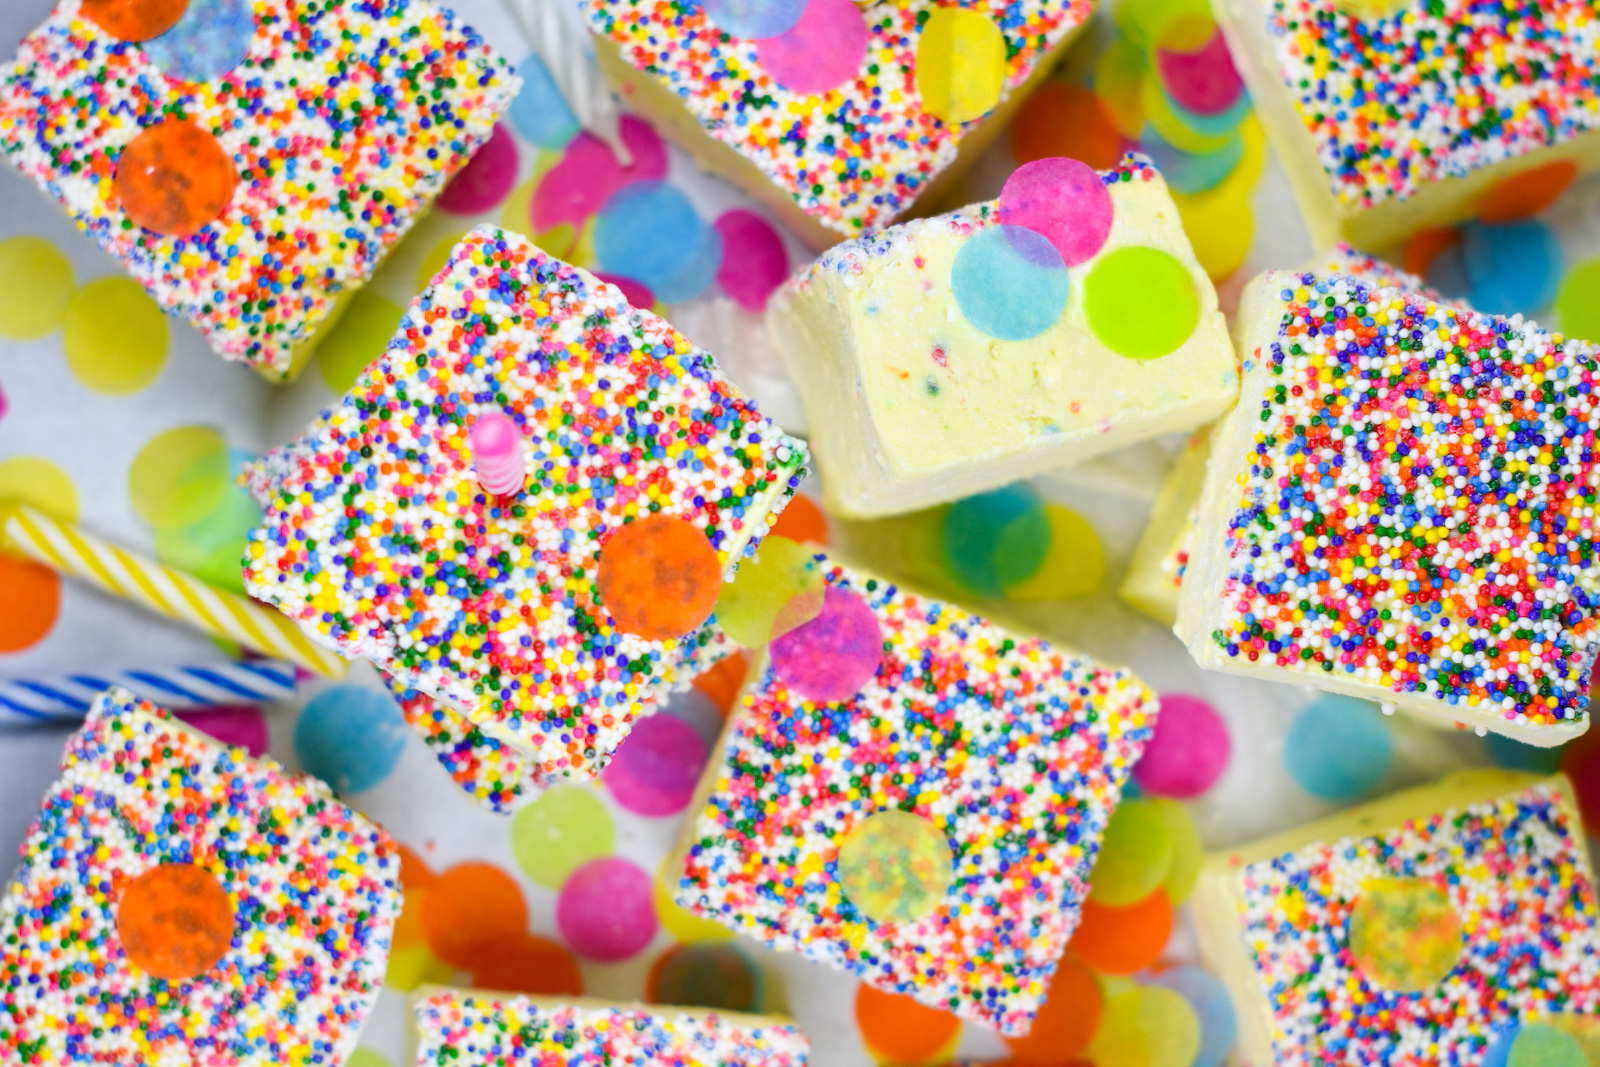 marshmallows arranged on a white surface with sprinkles and confetti